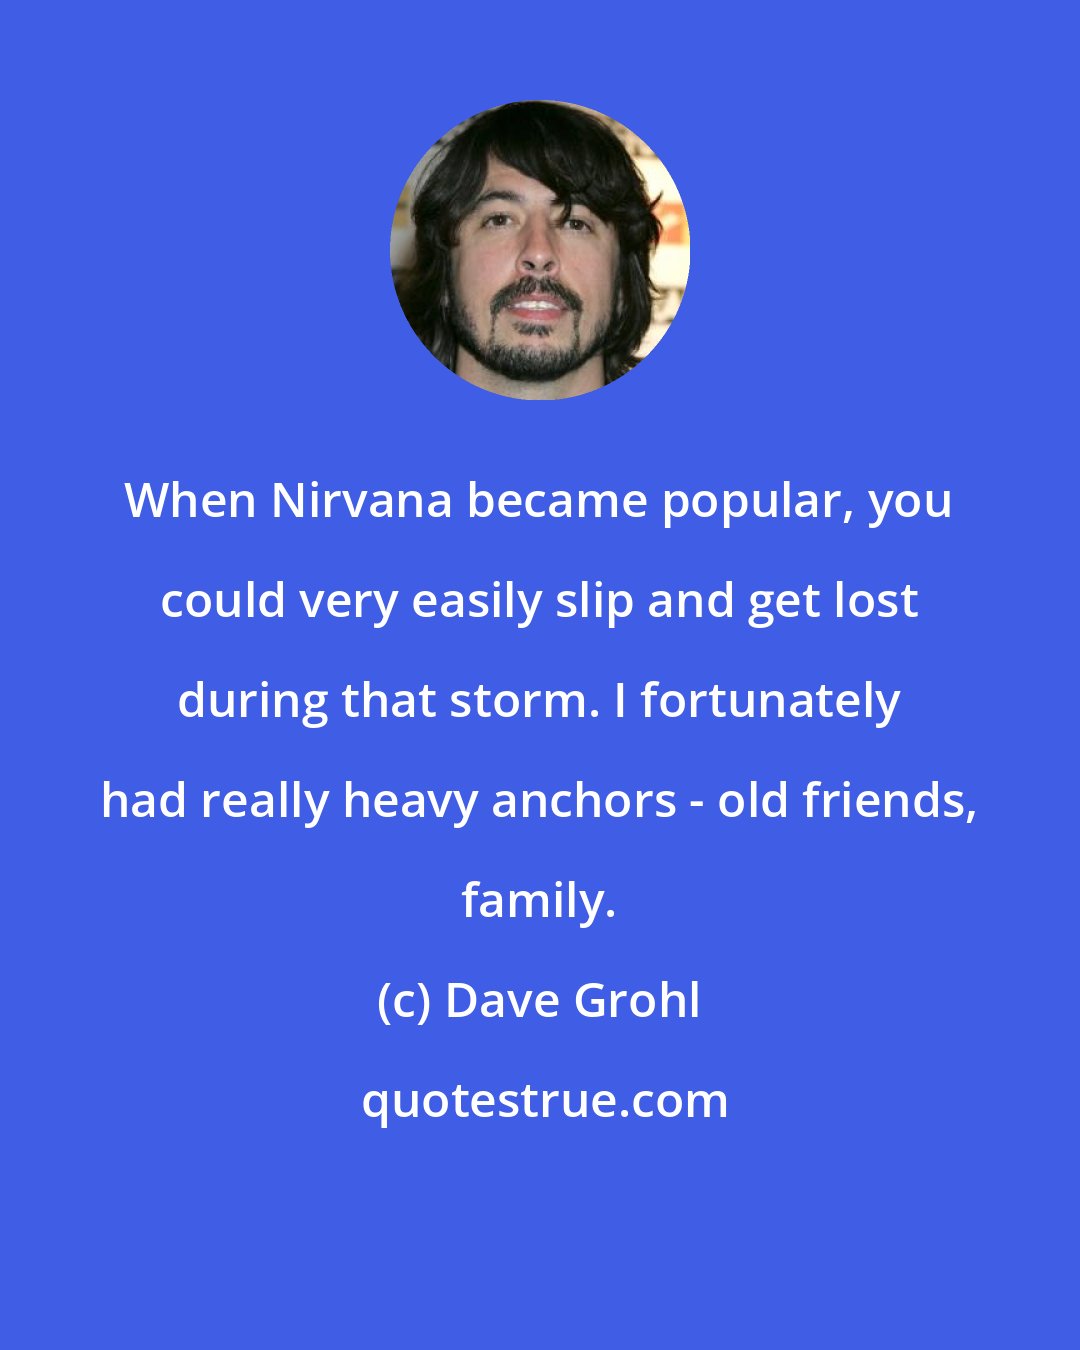 Dave Grohl: When Nirvana became popular, you could very easily slip and get lost during that storm. I fortunately had really heavy anchors - old friends, family.